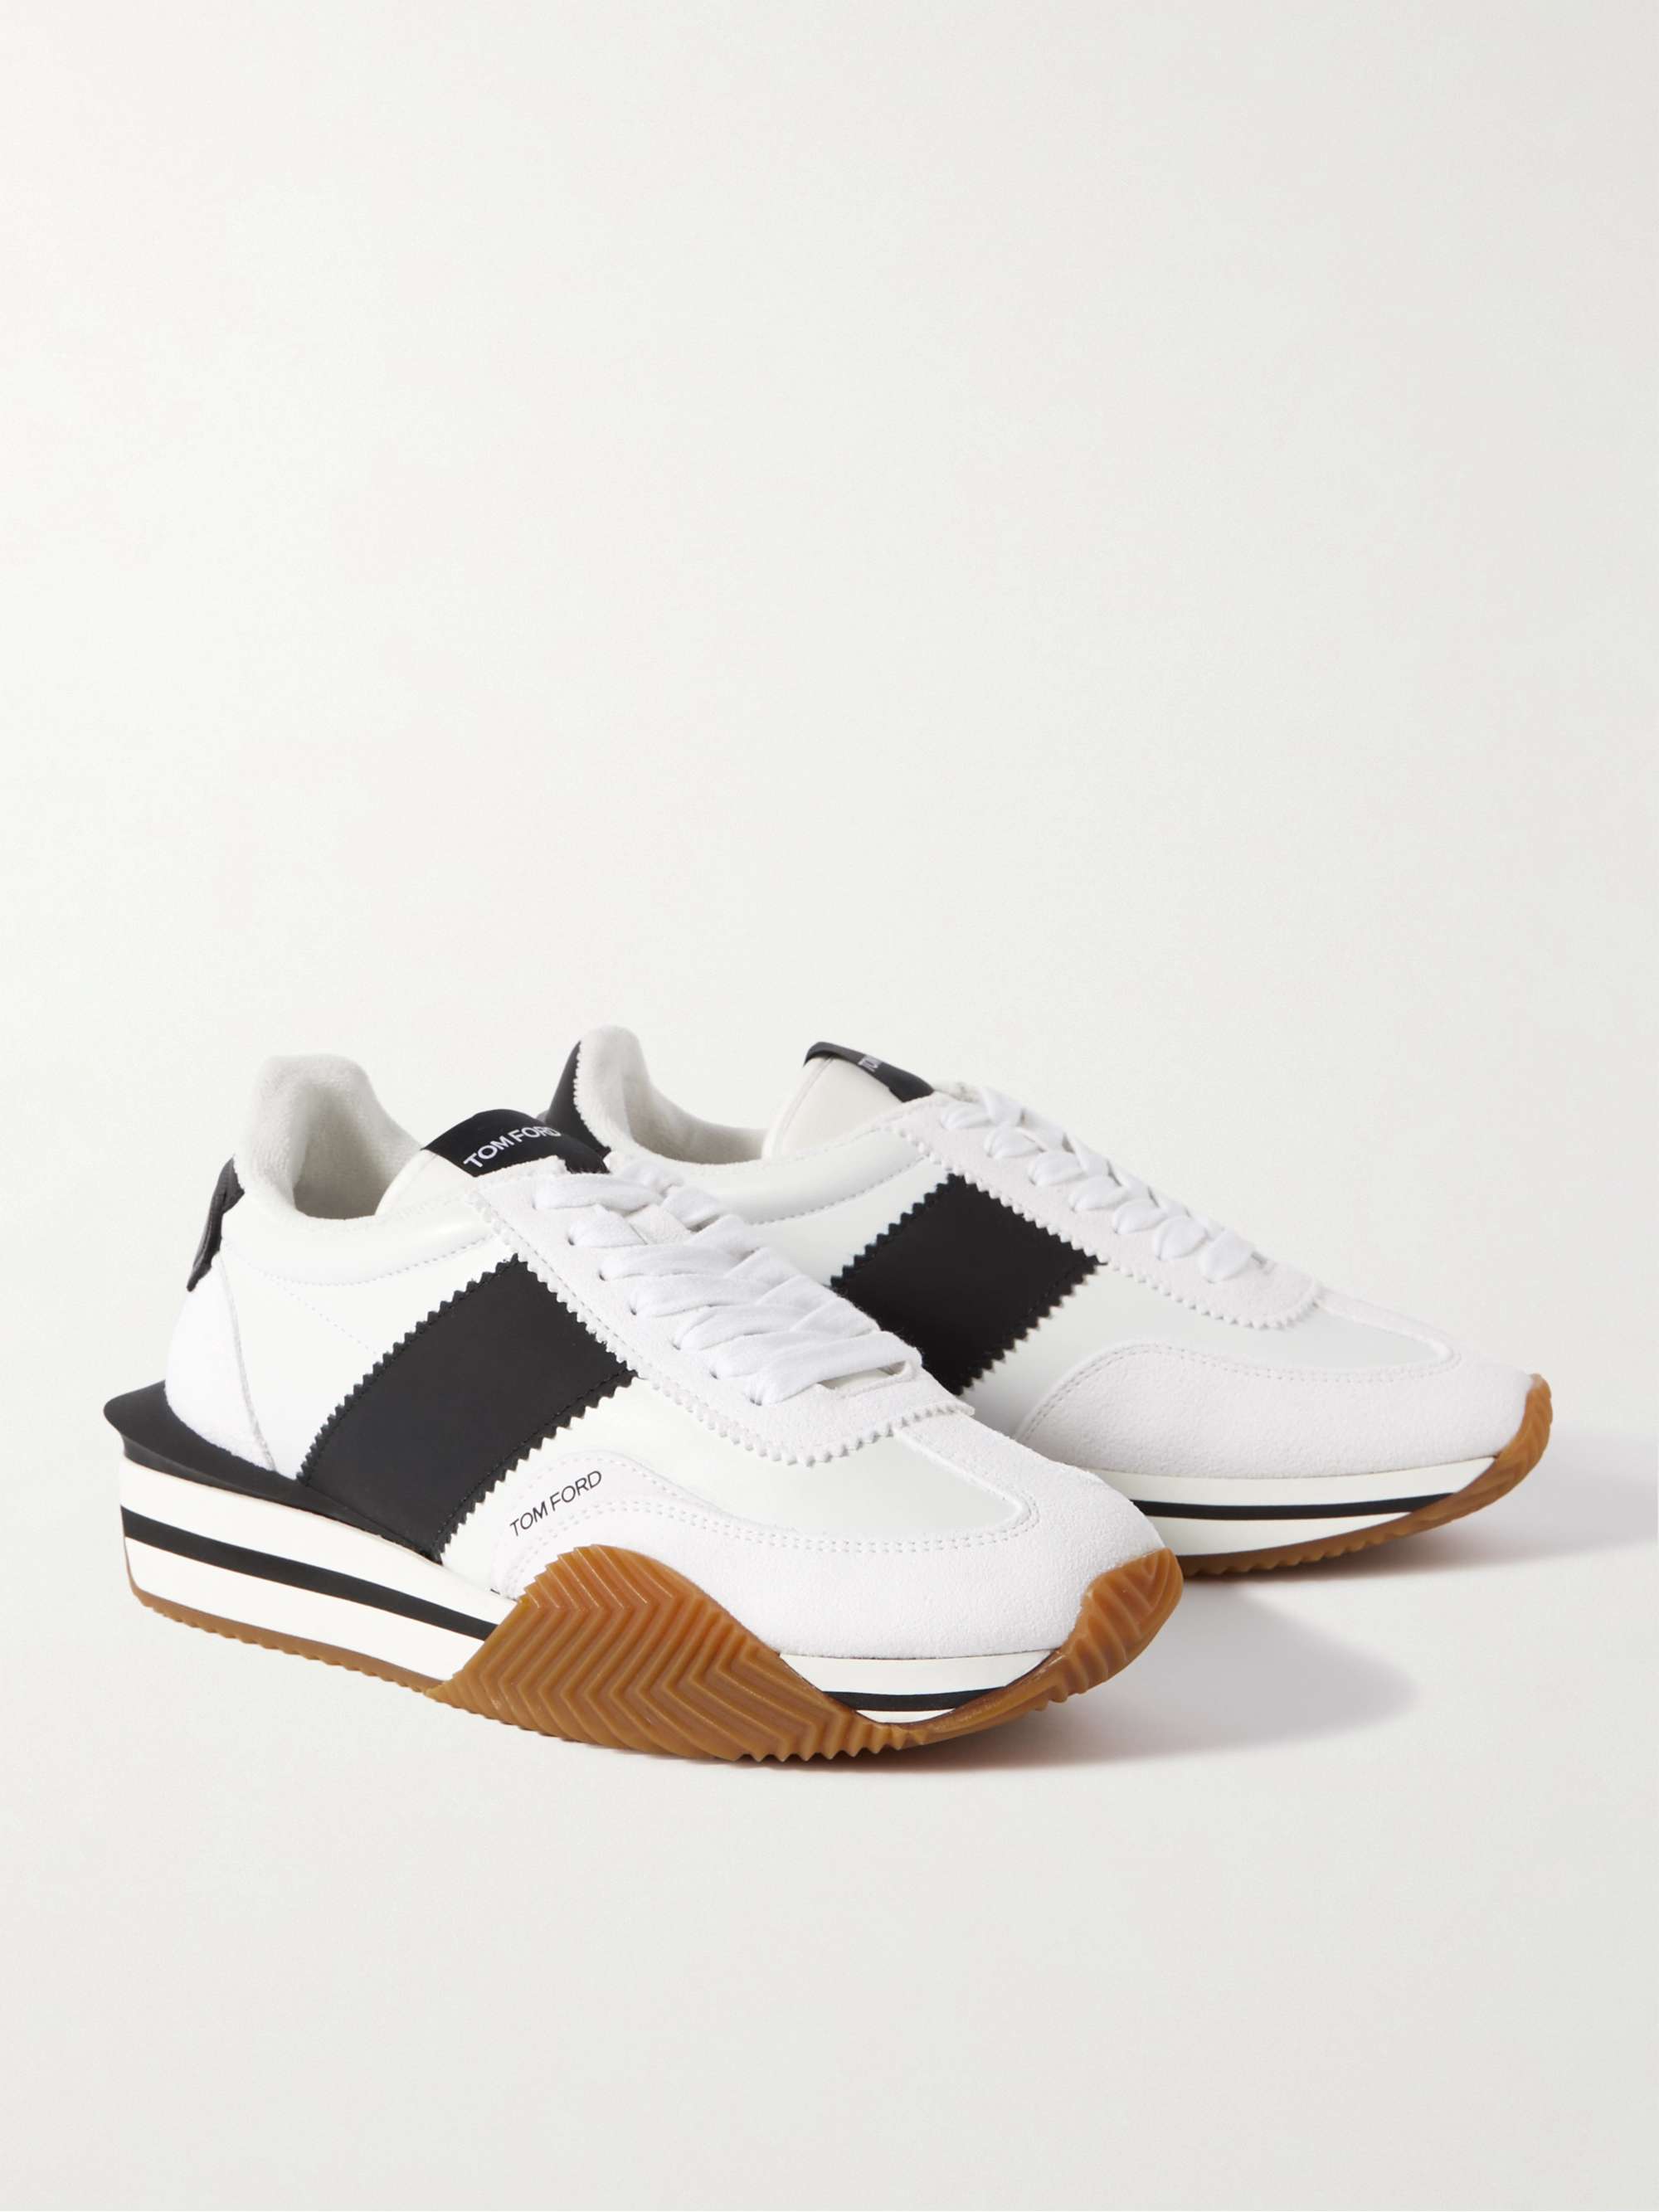 TOM FORD James Rubber-Trimmed Leather and Suede Sneakers